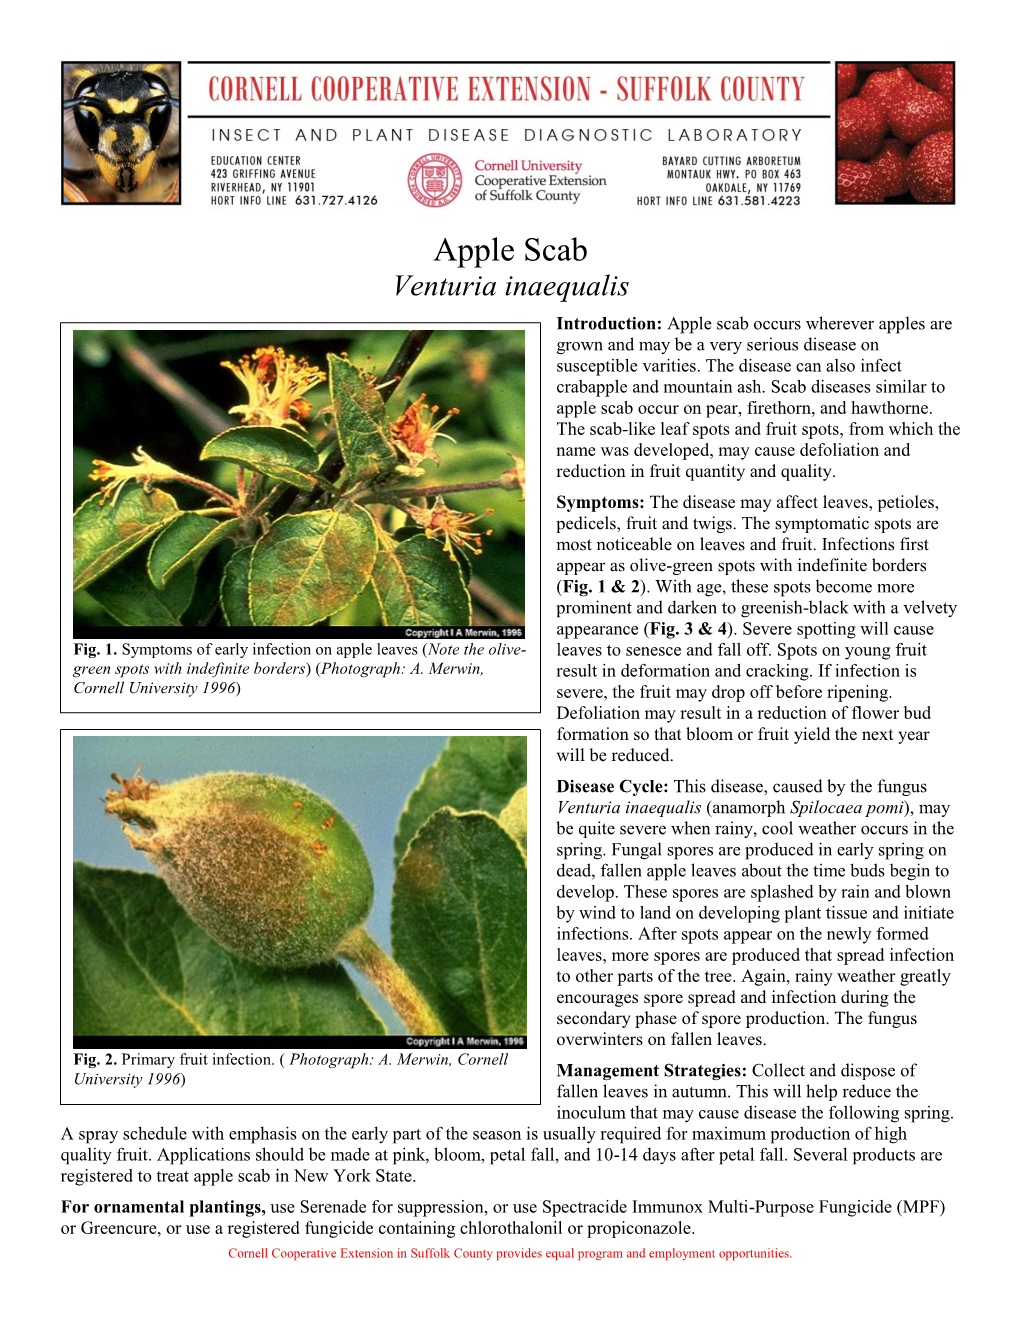 Apple Scab Venturia Inaequalis Introduction: Apple Scab Occurs Wherever Apples Are Grown and May Be a Very Serious Disease on Susceptible Varities